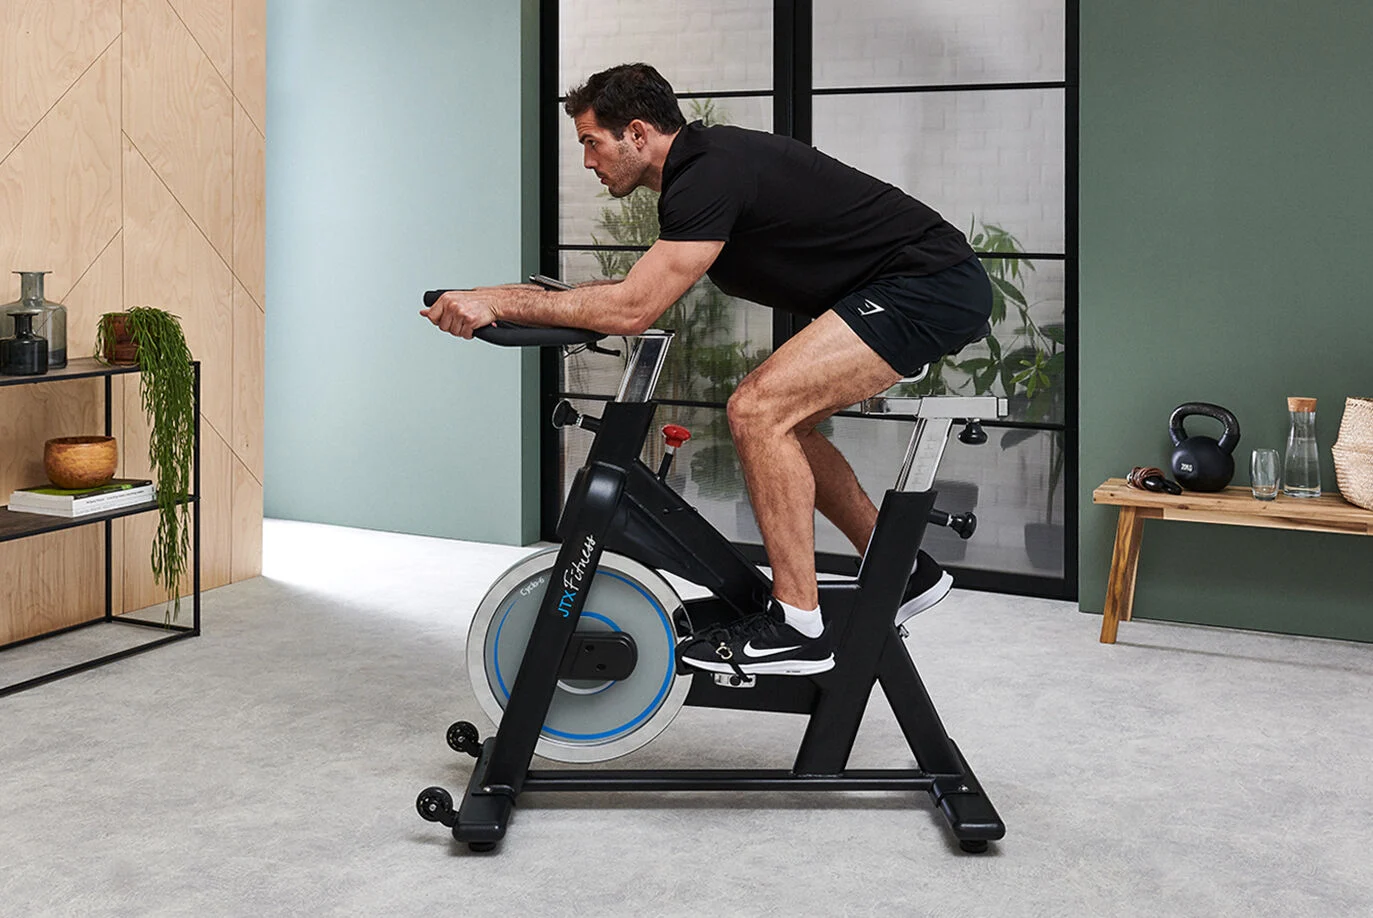 Are Exercise Bikes As Efficient As Bicycles?